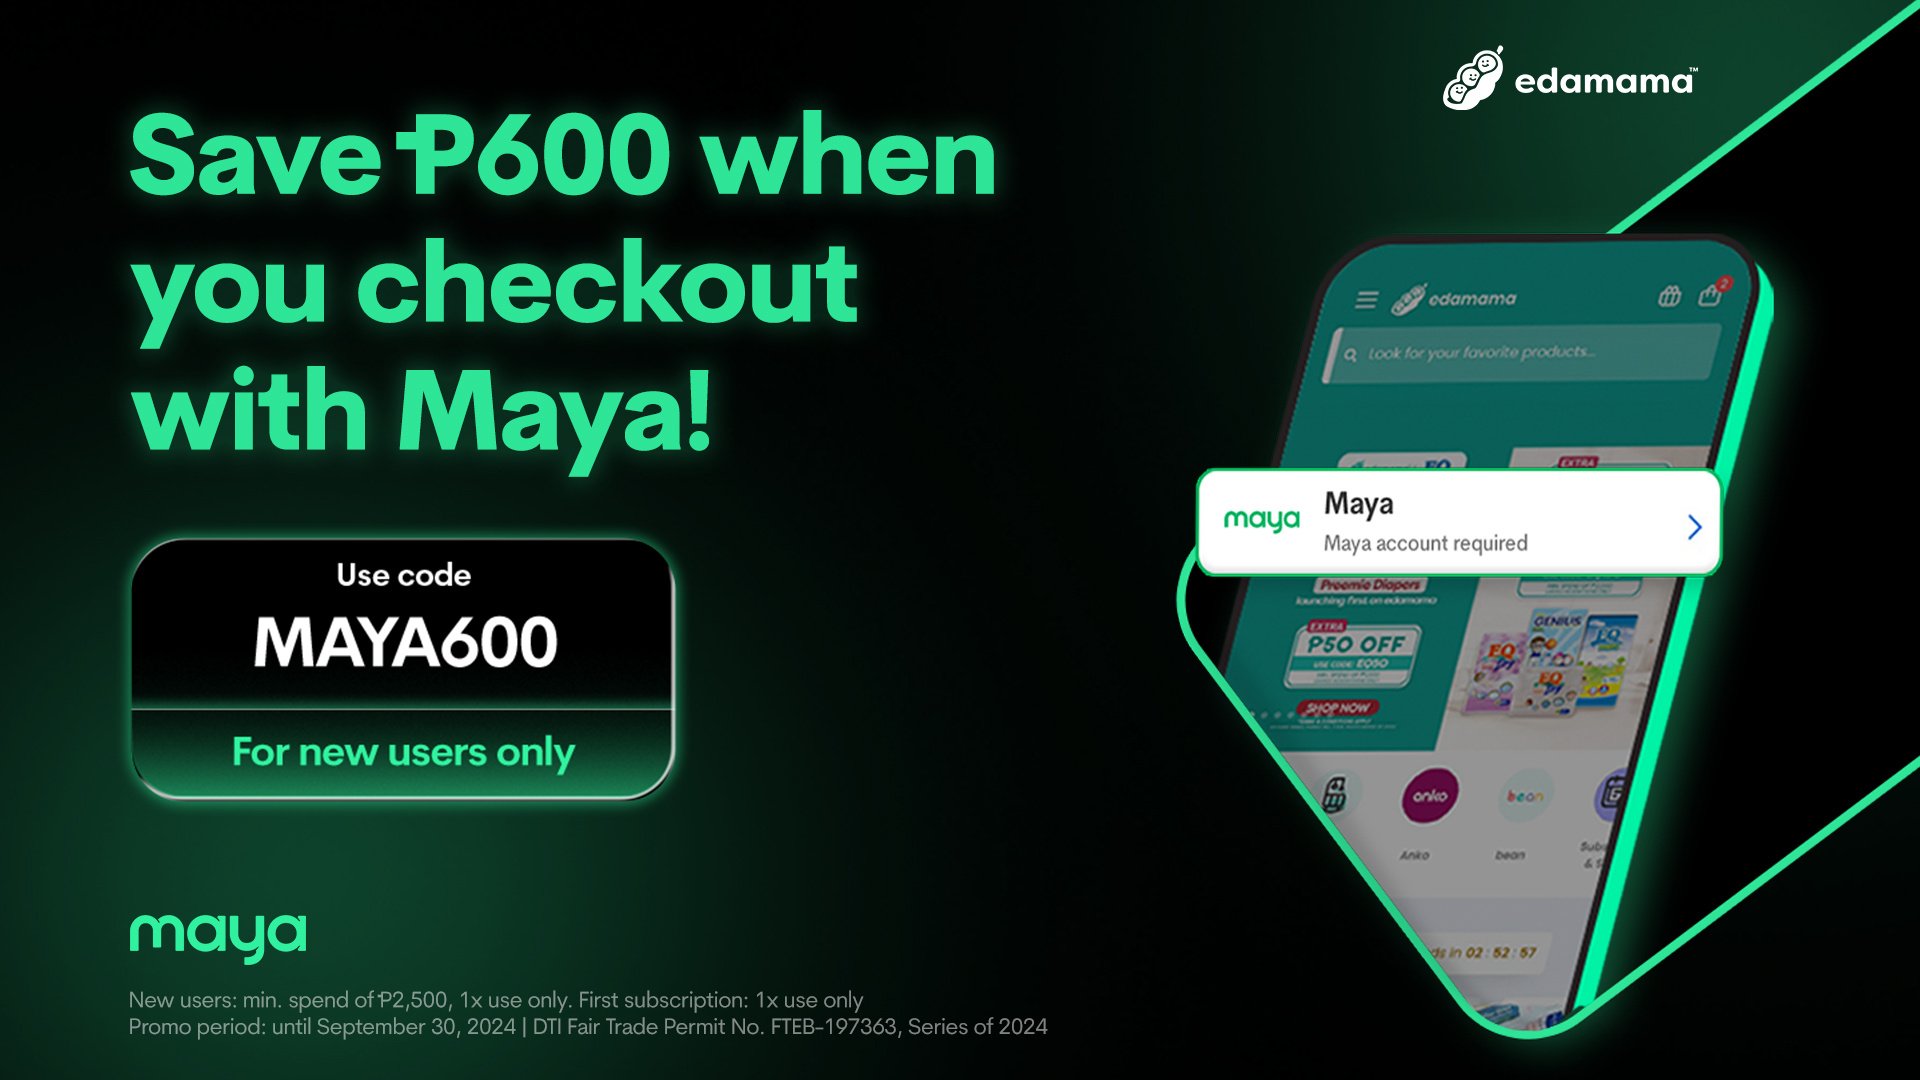 Save P600 OFF when you checkout with Maya on edamama!